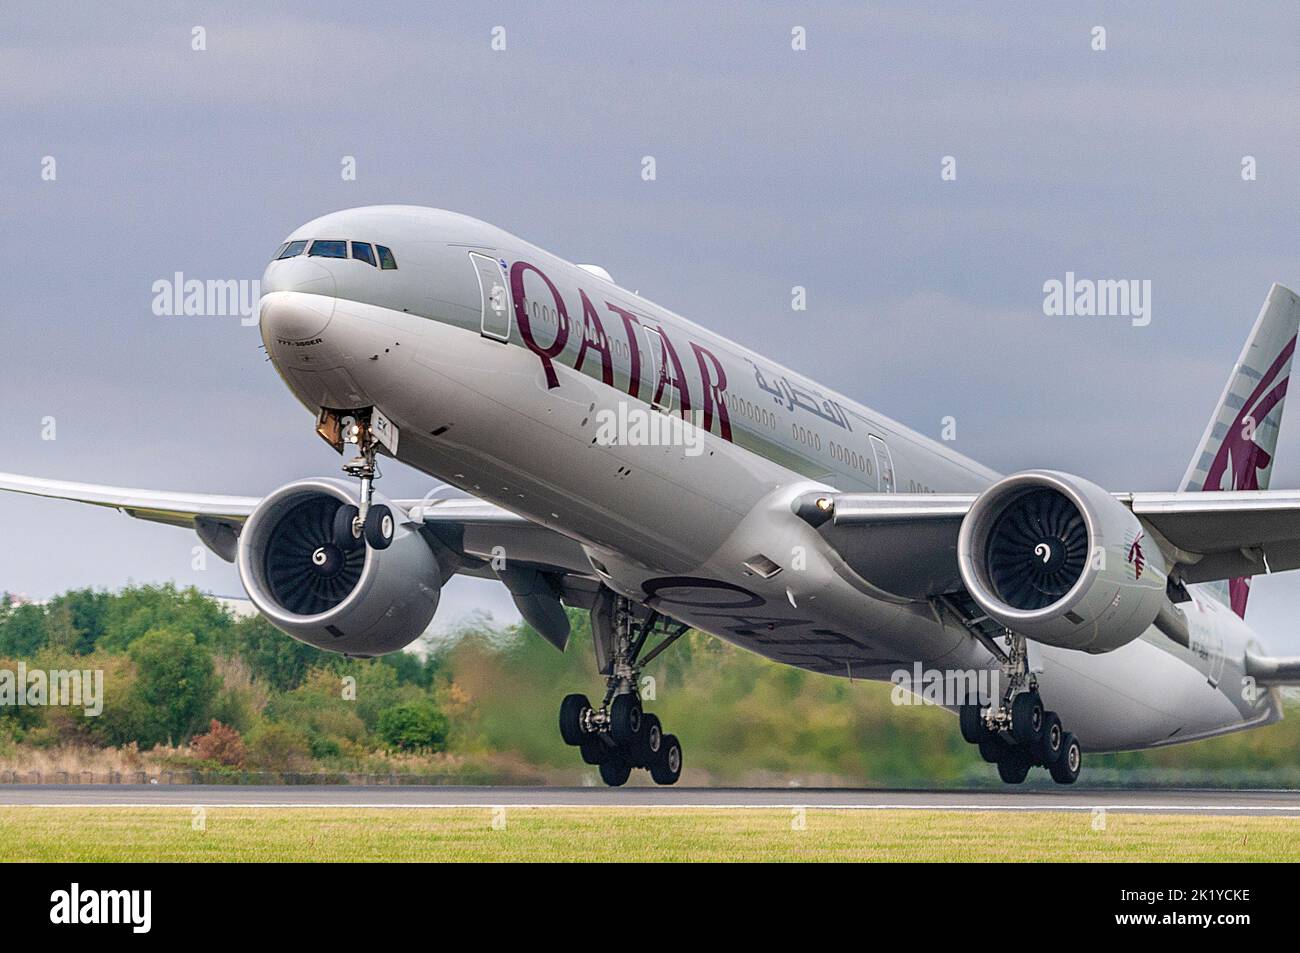 Qatar Airways Boeing 777-300/ER registration A7-BEK takes off at Manchester airport. Stock Photo